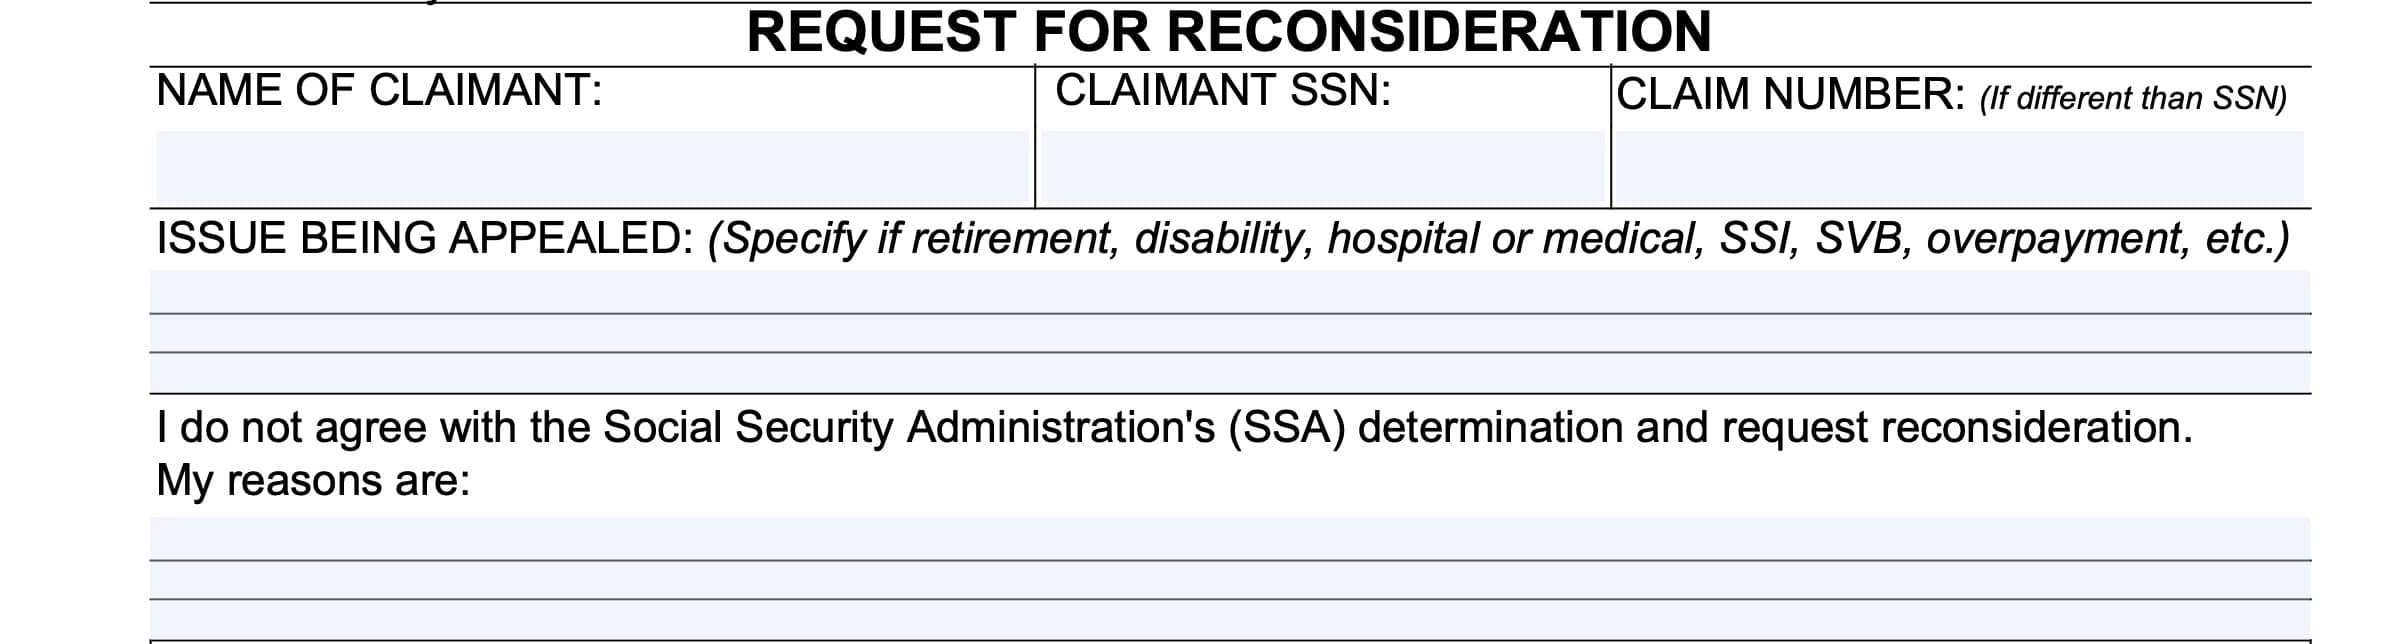 Form SSA 561, Request for reconsideration